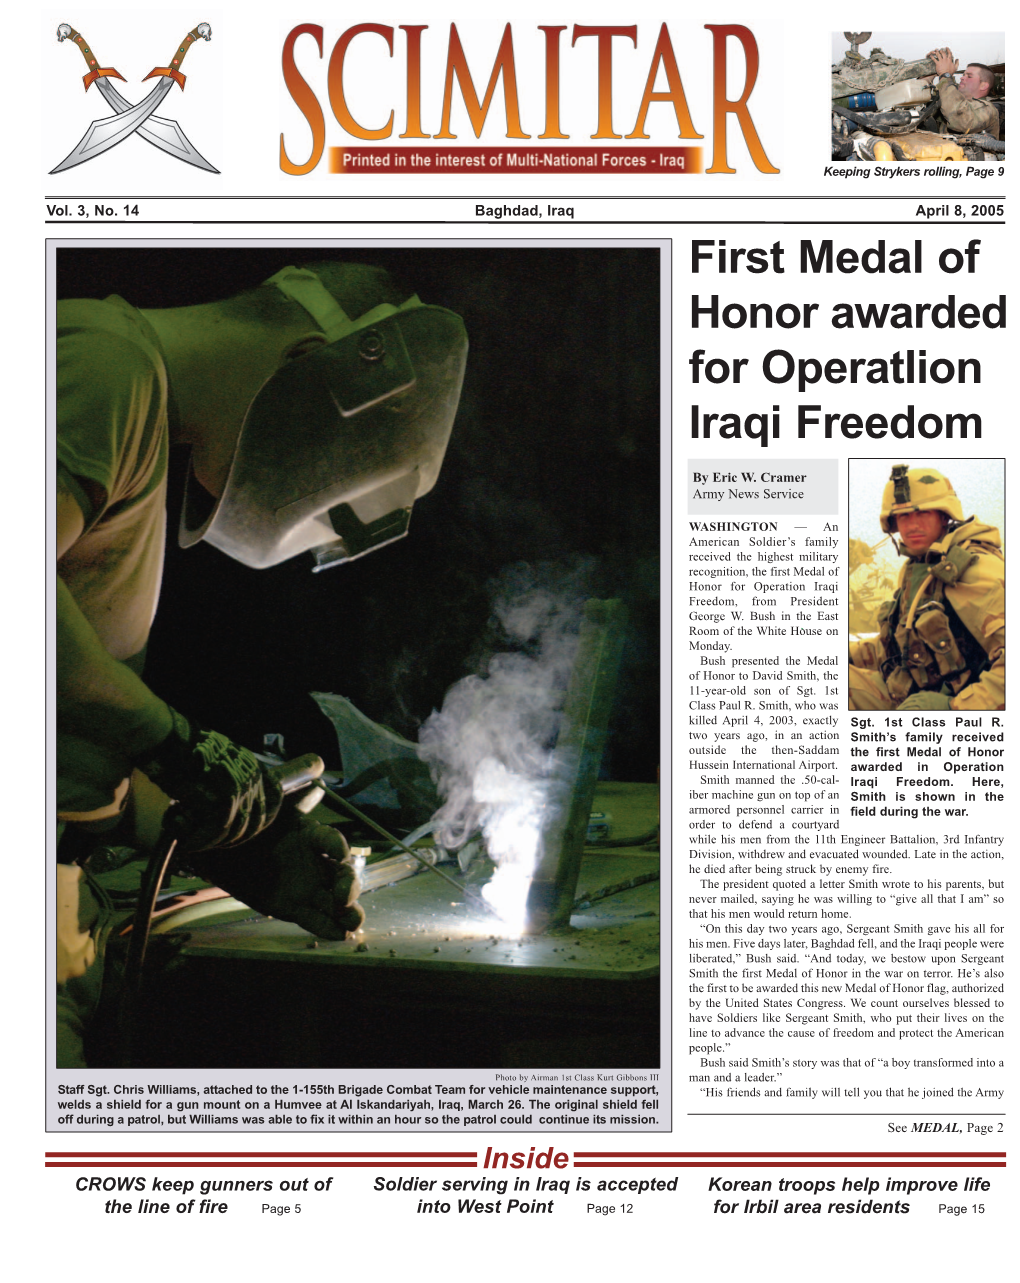 First Medal of Honor Awarded for Operatiion Iraqi Freedom